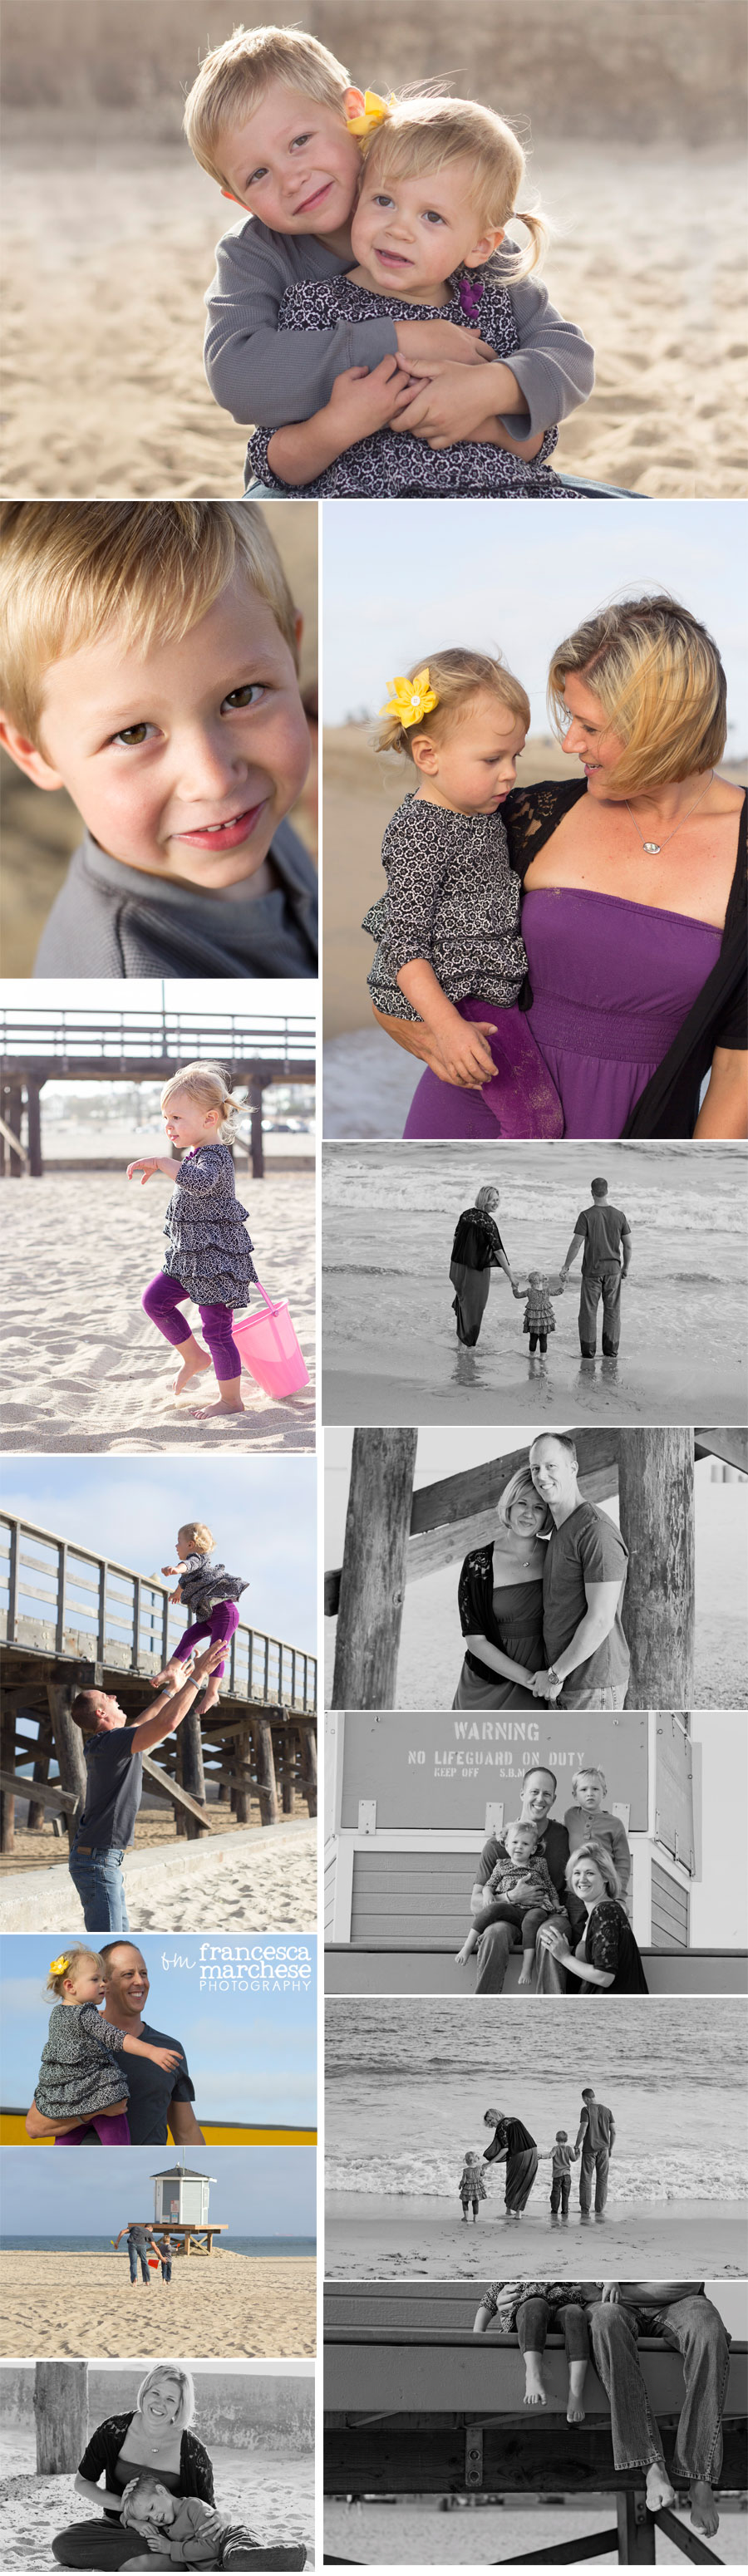 Family Beach Session - Francesca Marchese Photography